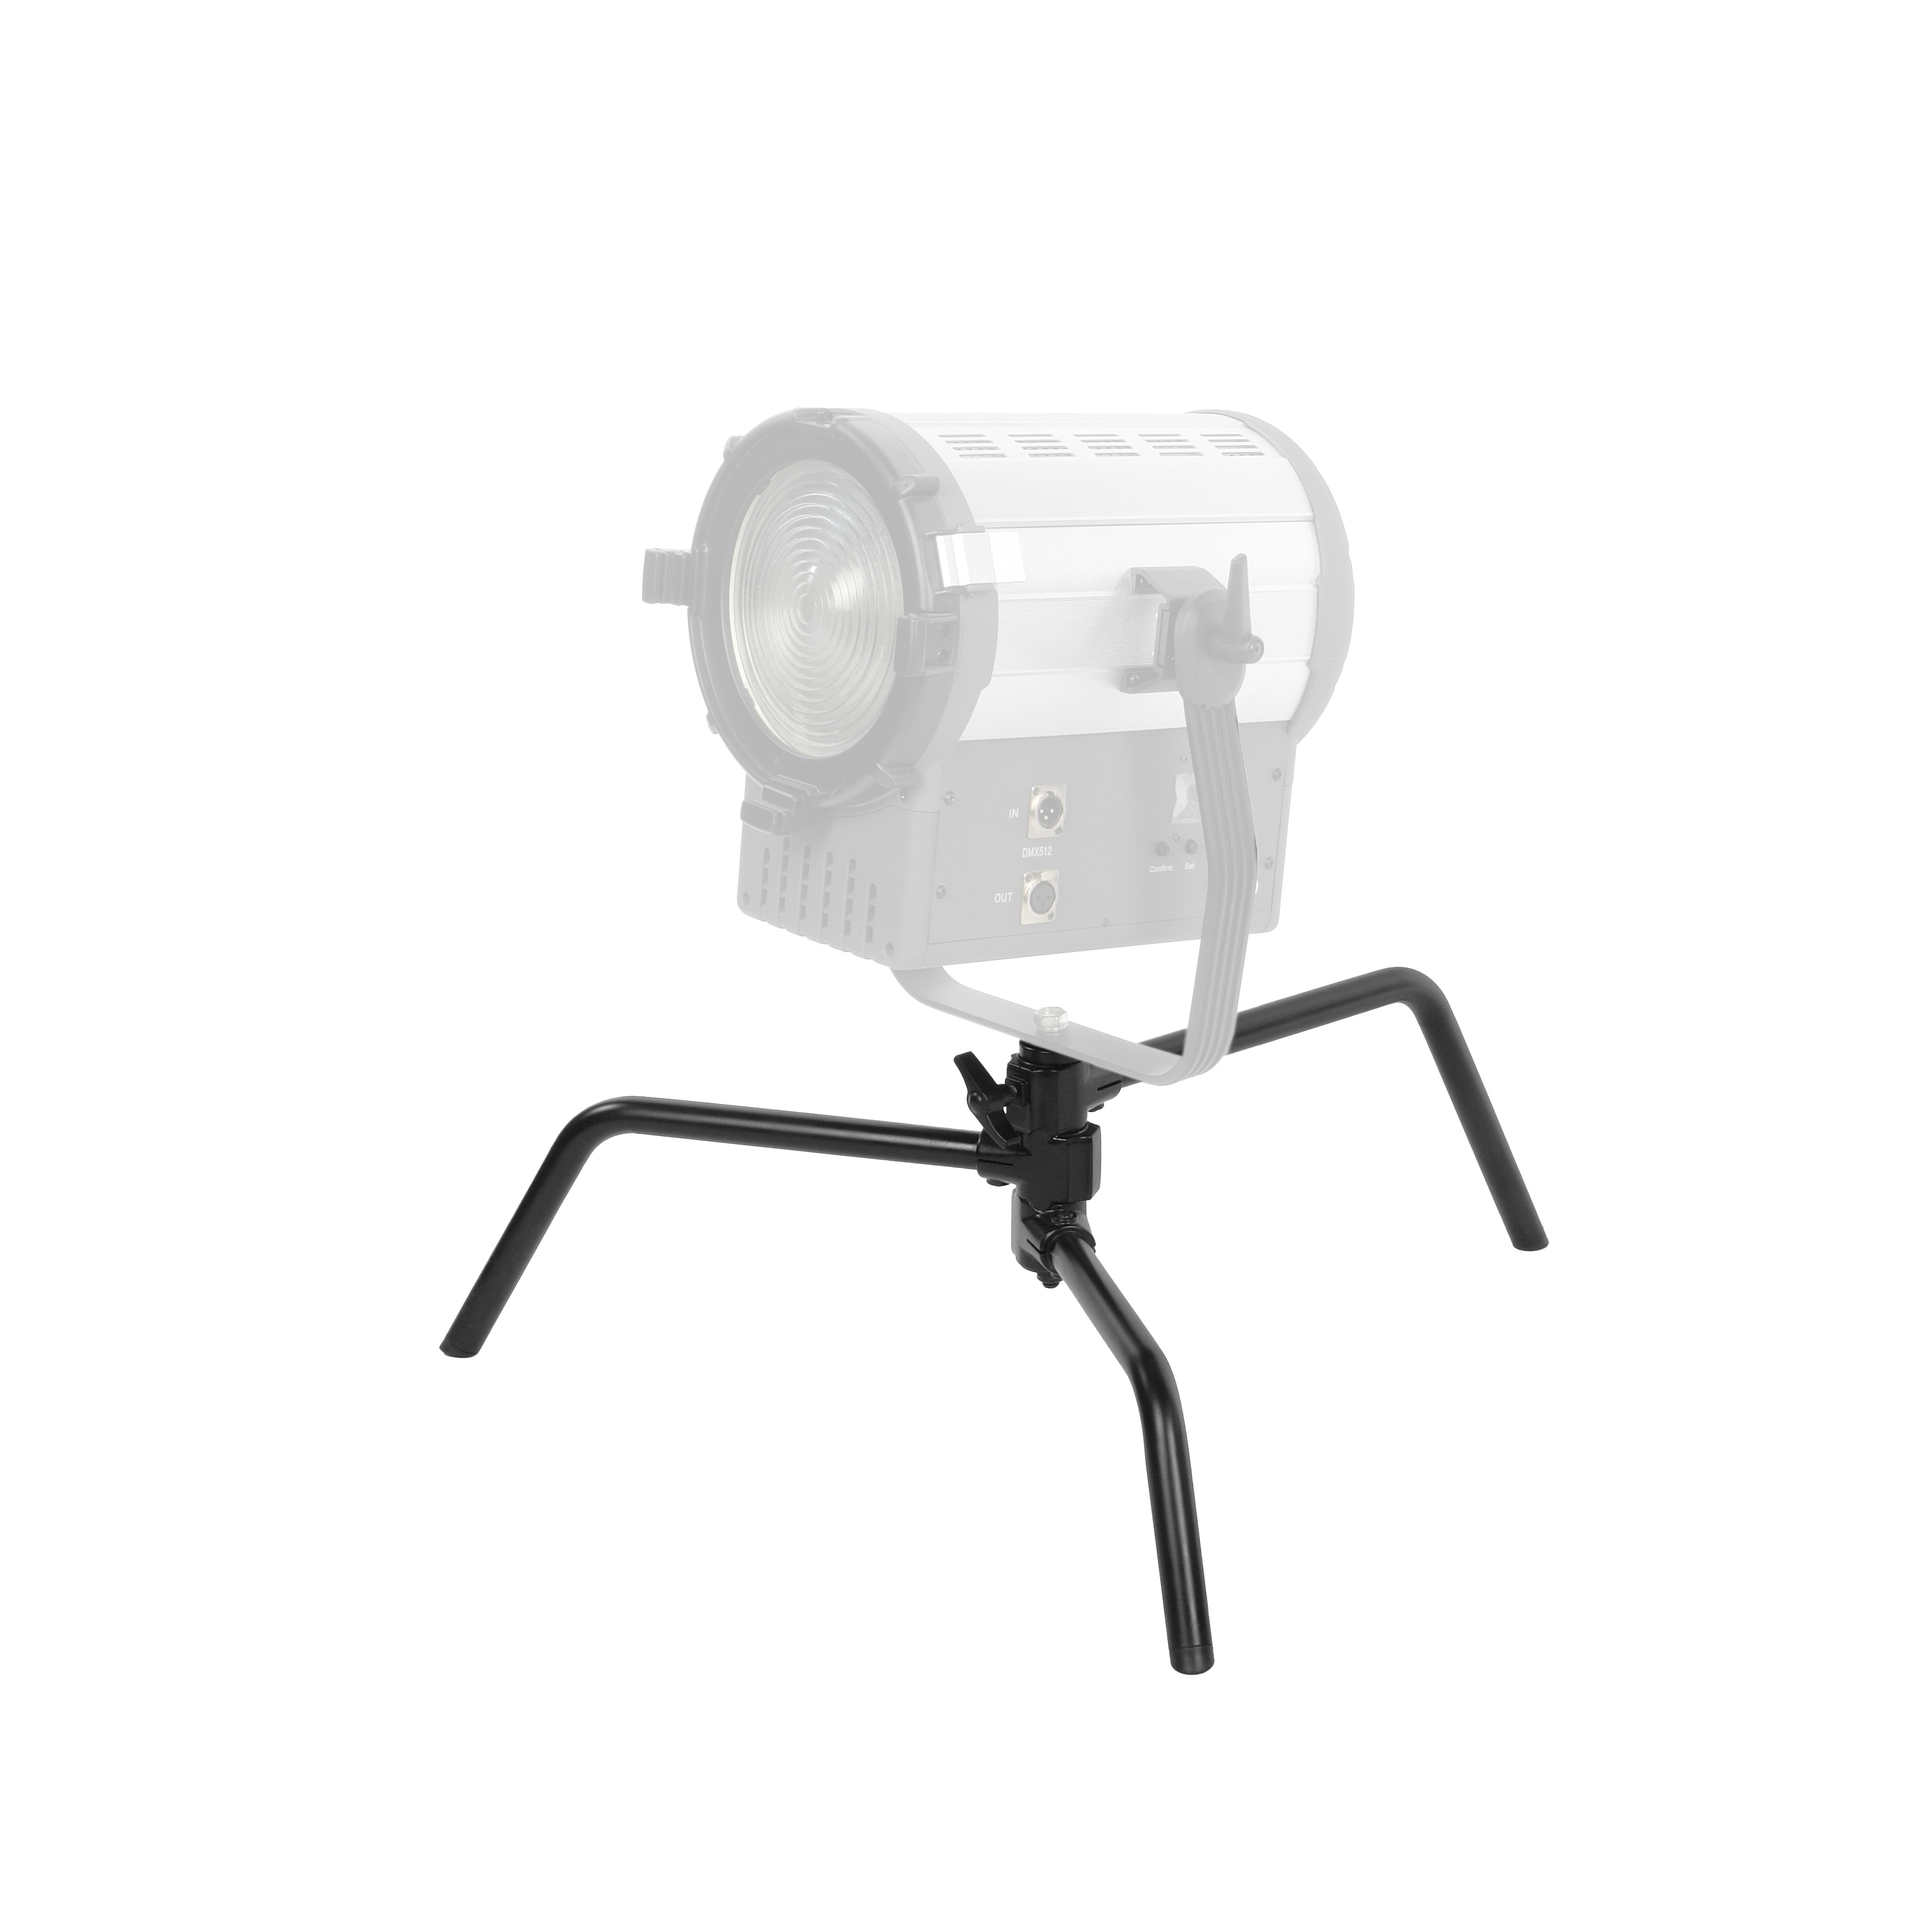  - Falcon Eyes C-Stand LV-3300BH   Ultra-mart